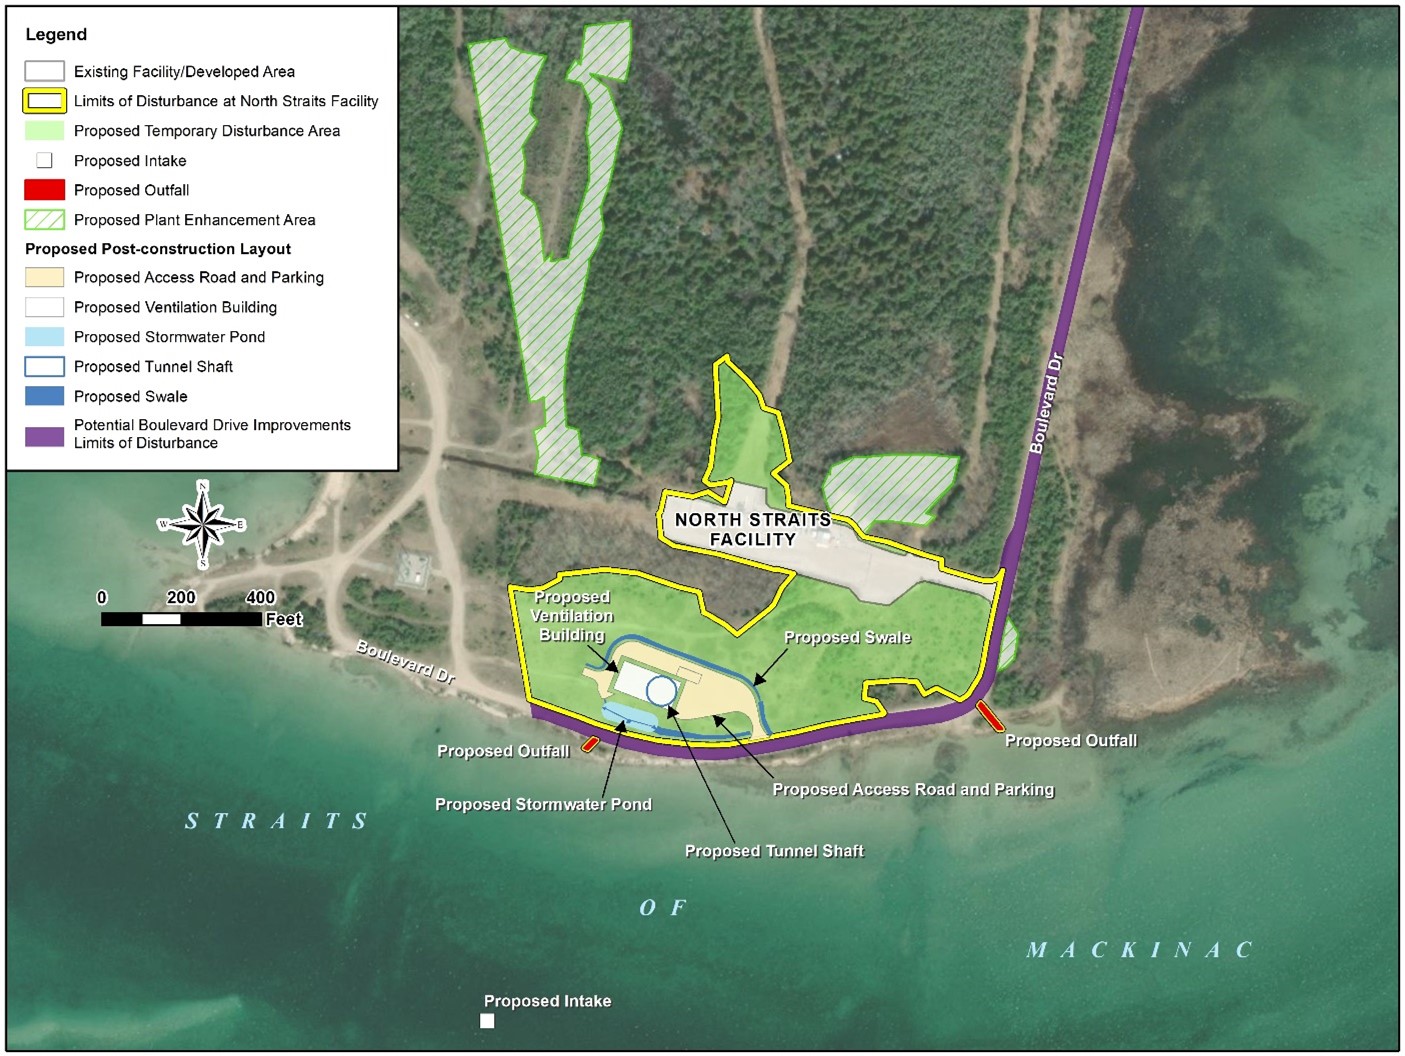 North Straits Facility (North Site) Disturbance Area and Post-construction Layout